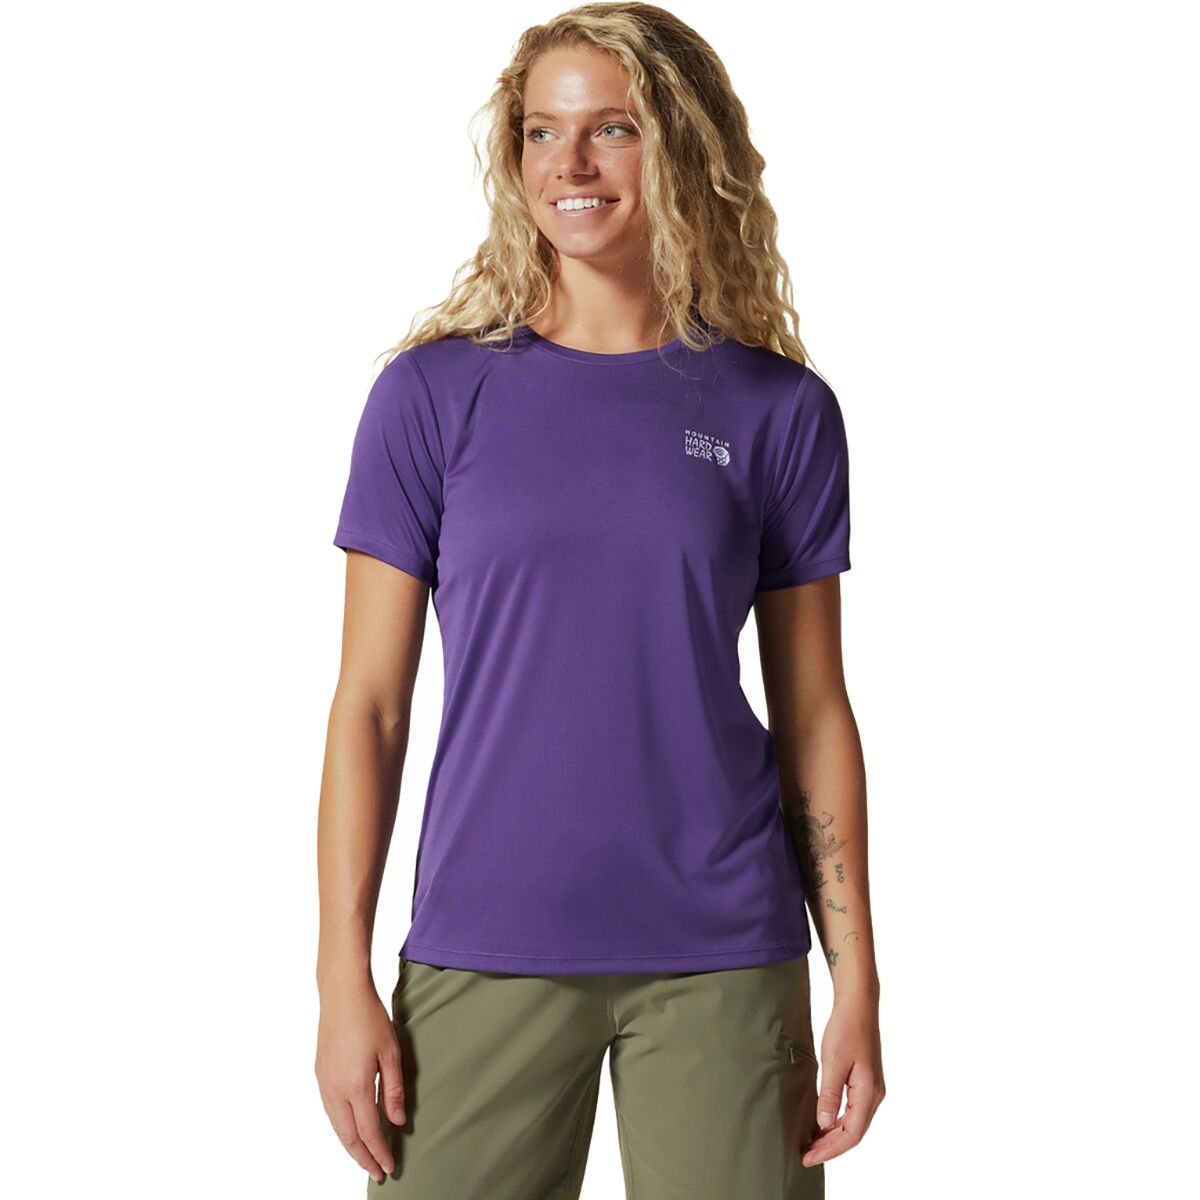 Mountain Hardwear, women's t-shirts and other short-sleeved shirts